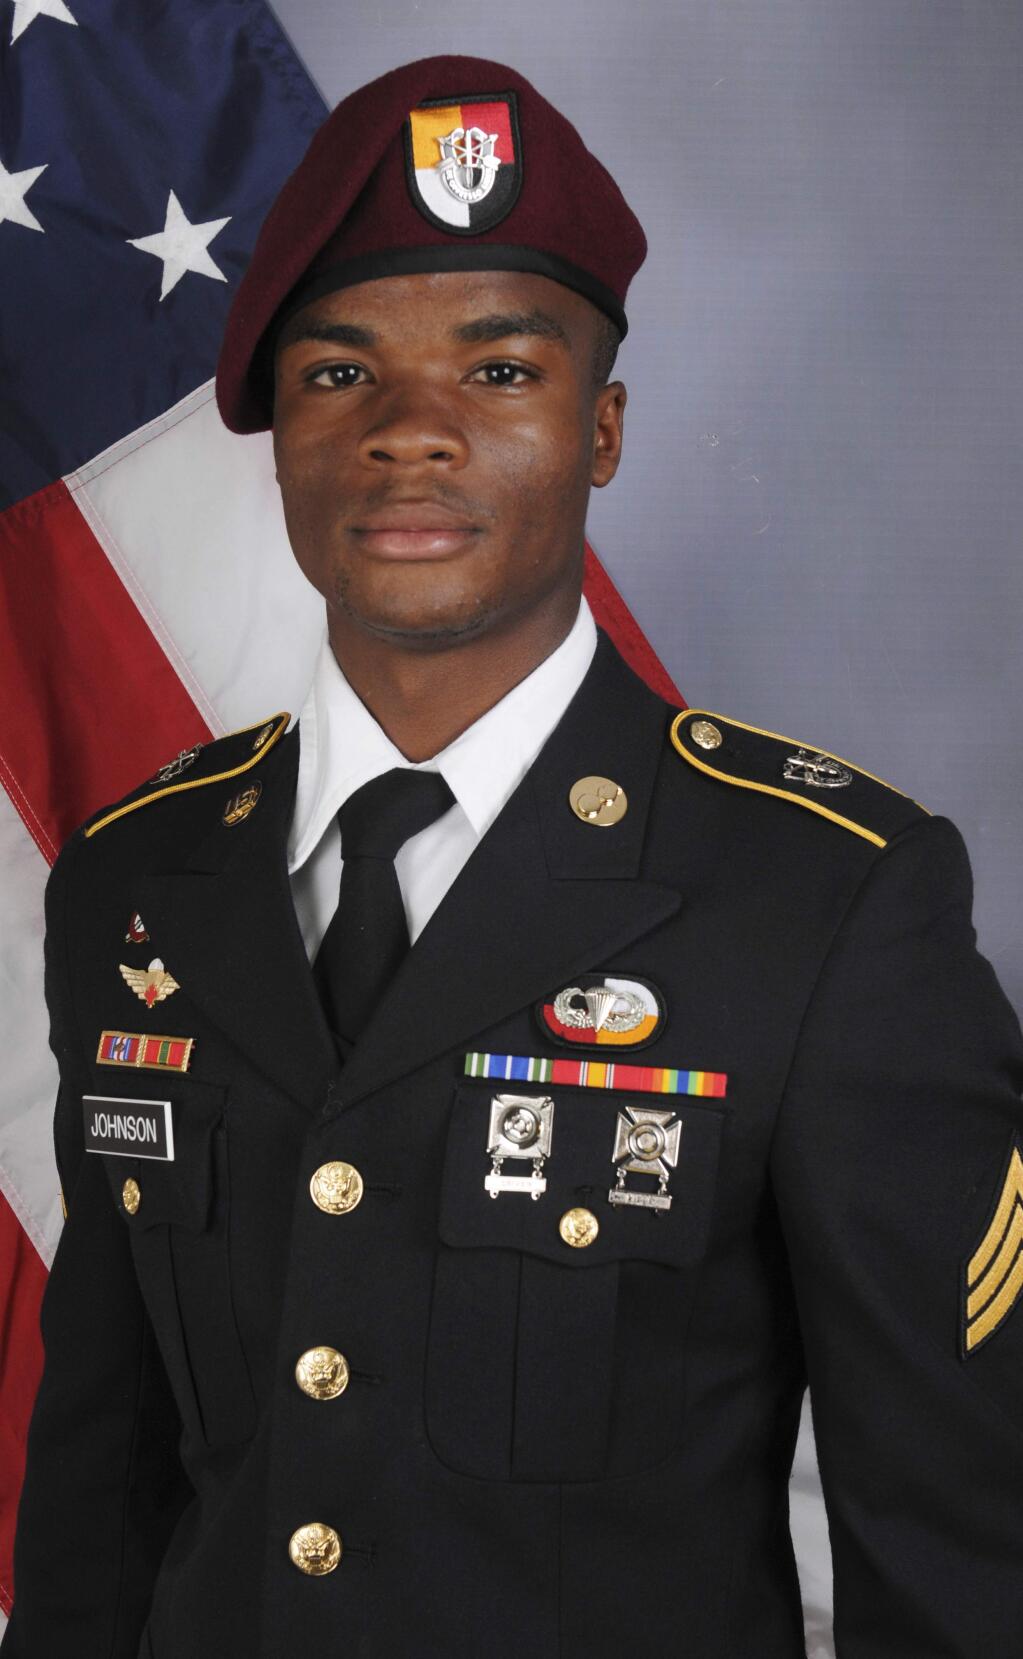 This photo provided by the U.S. Army Special Operations Command shows Sgt. La David Johnson, who was killed in an ambush in Niger. President Donald Trump told Johnson's widow, Myeshia Johnson, that her husband 'knew what he signed up for,' according to Rep. Frederica Wilson, who said she heard part of the conversation on speakerphone. In a Wednesday morning tweet, Trump said Wilson's description of the call was 'fabricated.' (U.S. Army Special Operations Command via AP)